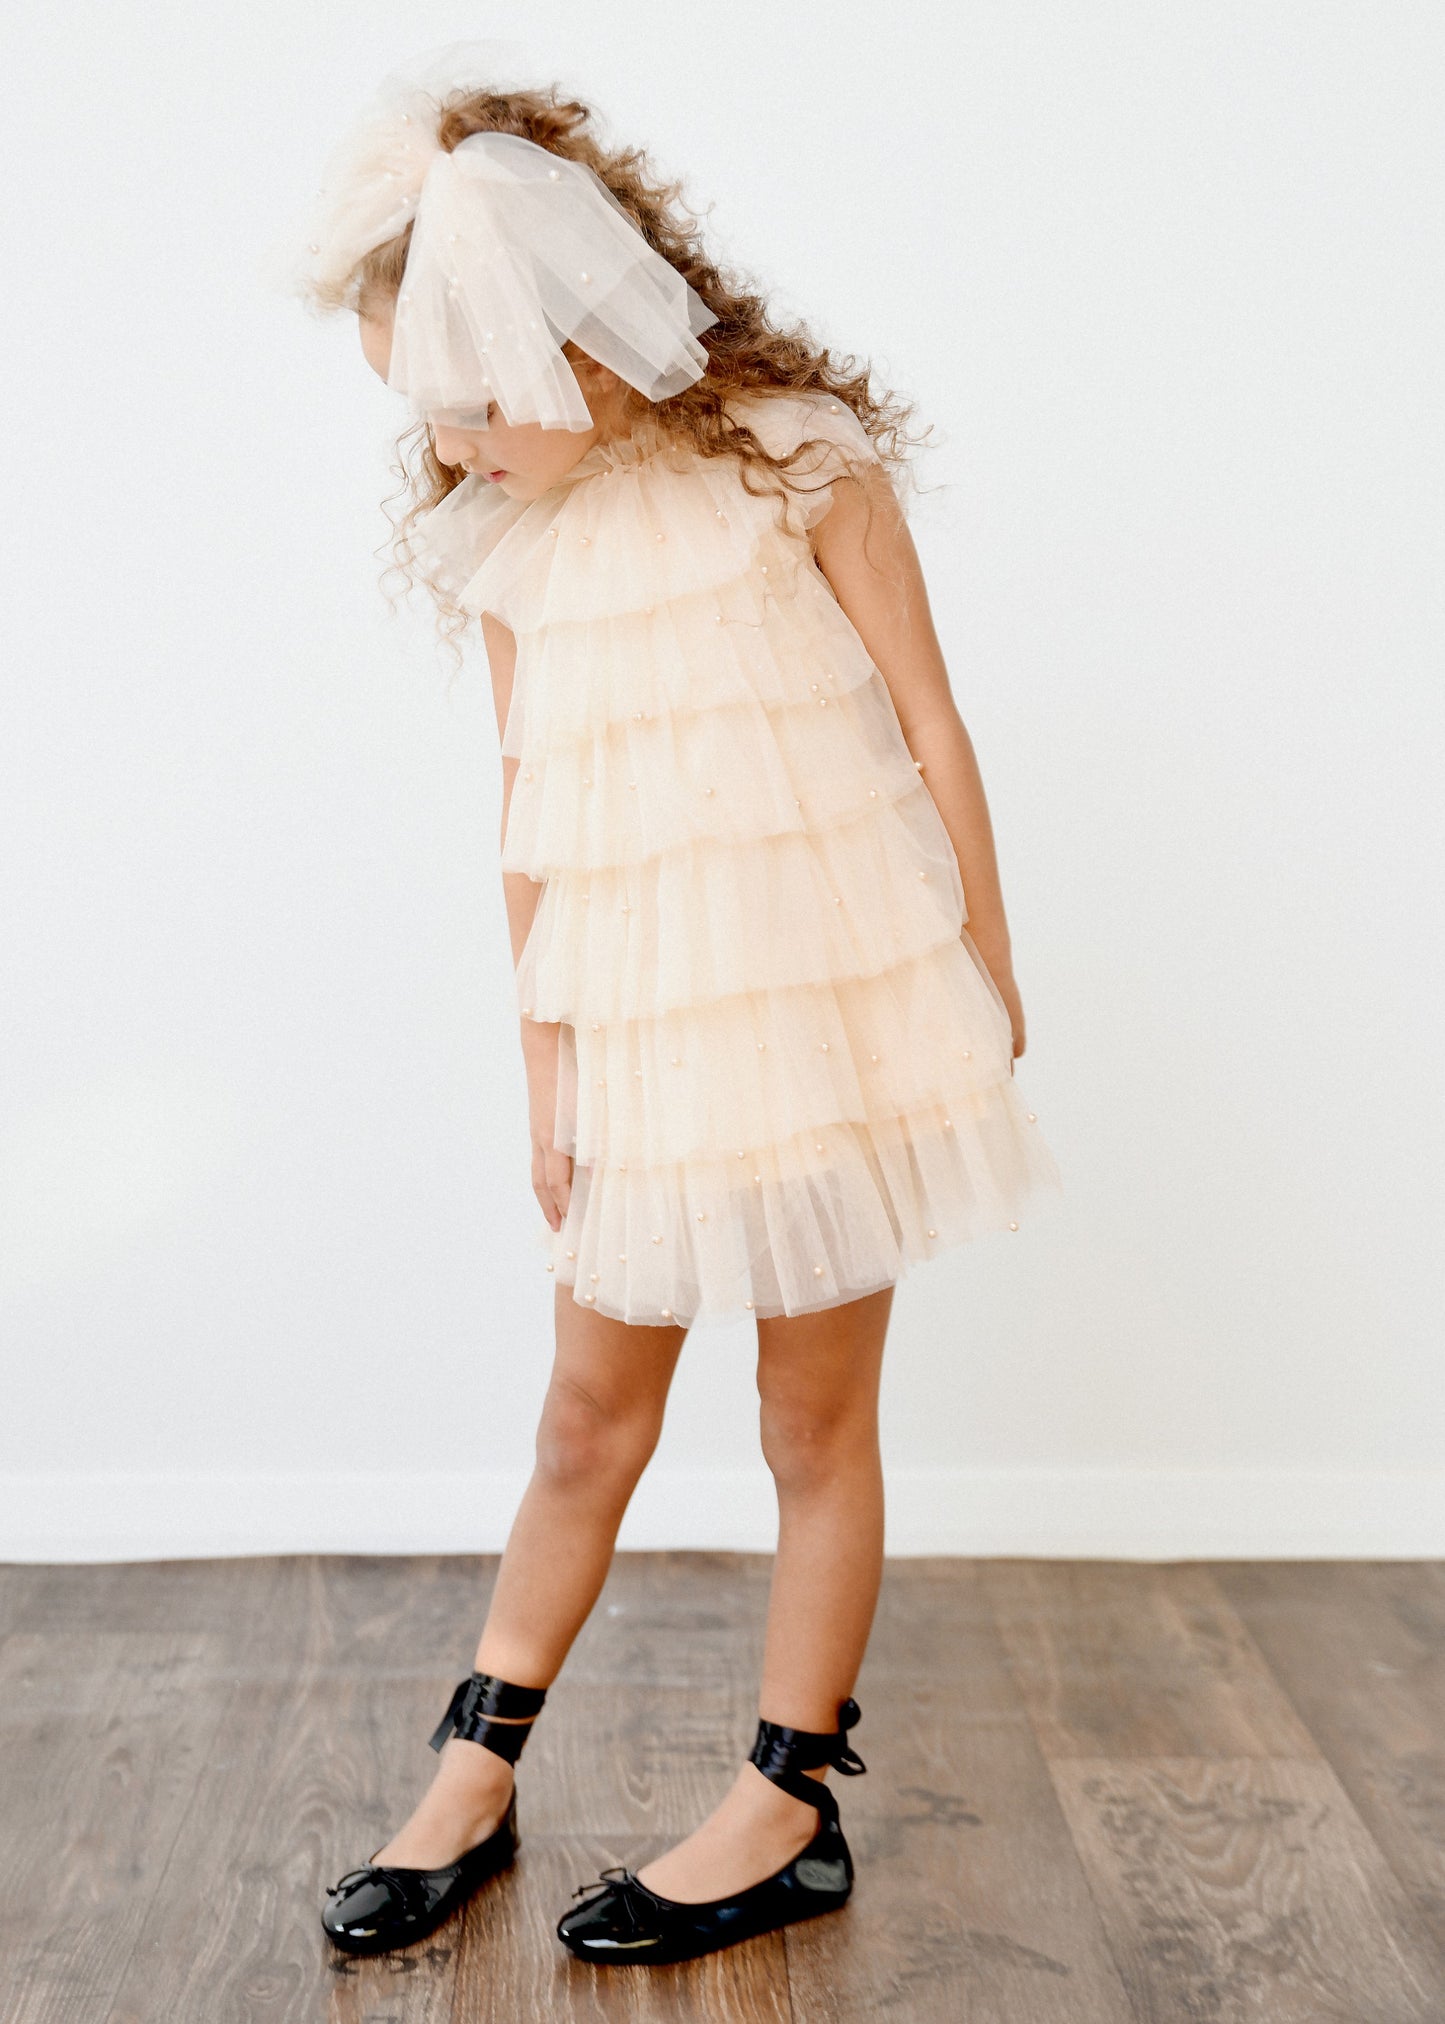 DOLLY® PEARL TUTULLY TIERED TULLE TUTU DRESS cream  ⚪